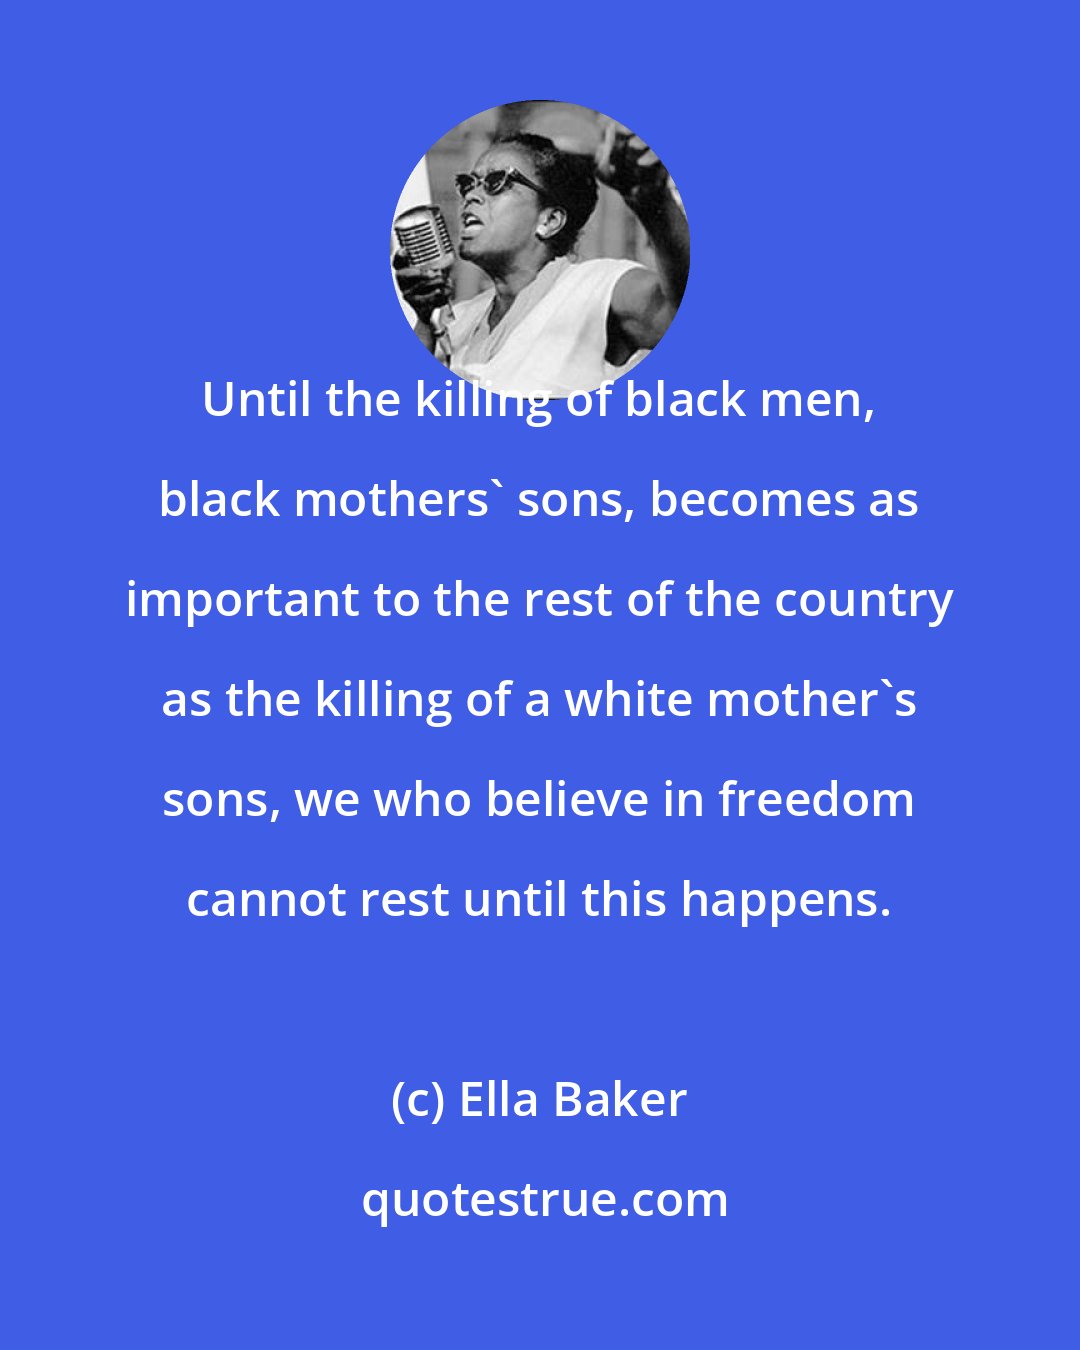 Ella Baker: Until the killing of black men, black mothers' sons, becomes as important to the rest of the country as the killing of a white mother's sons, we who believe in freedom cannot rest until this happens.